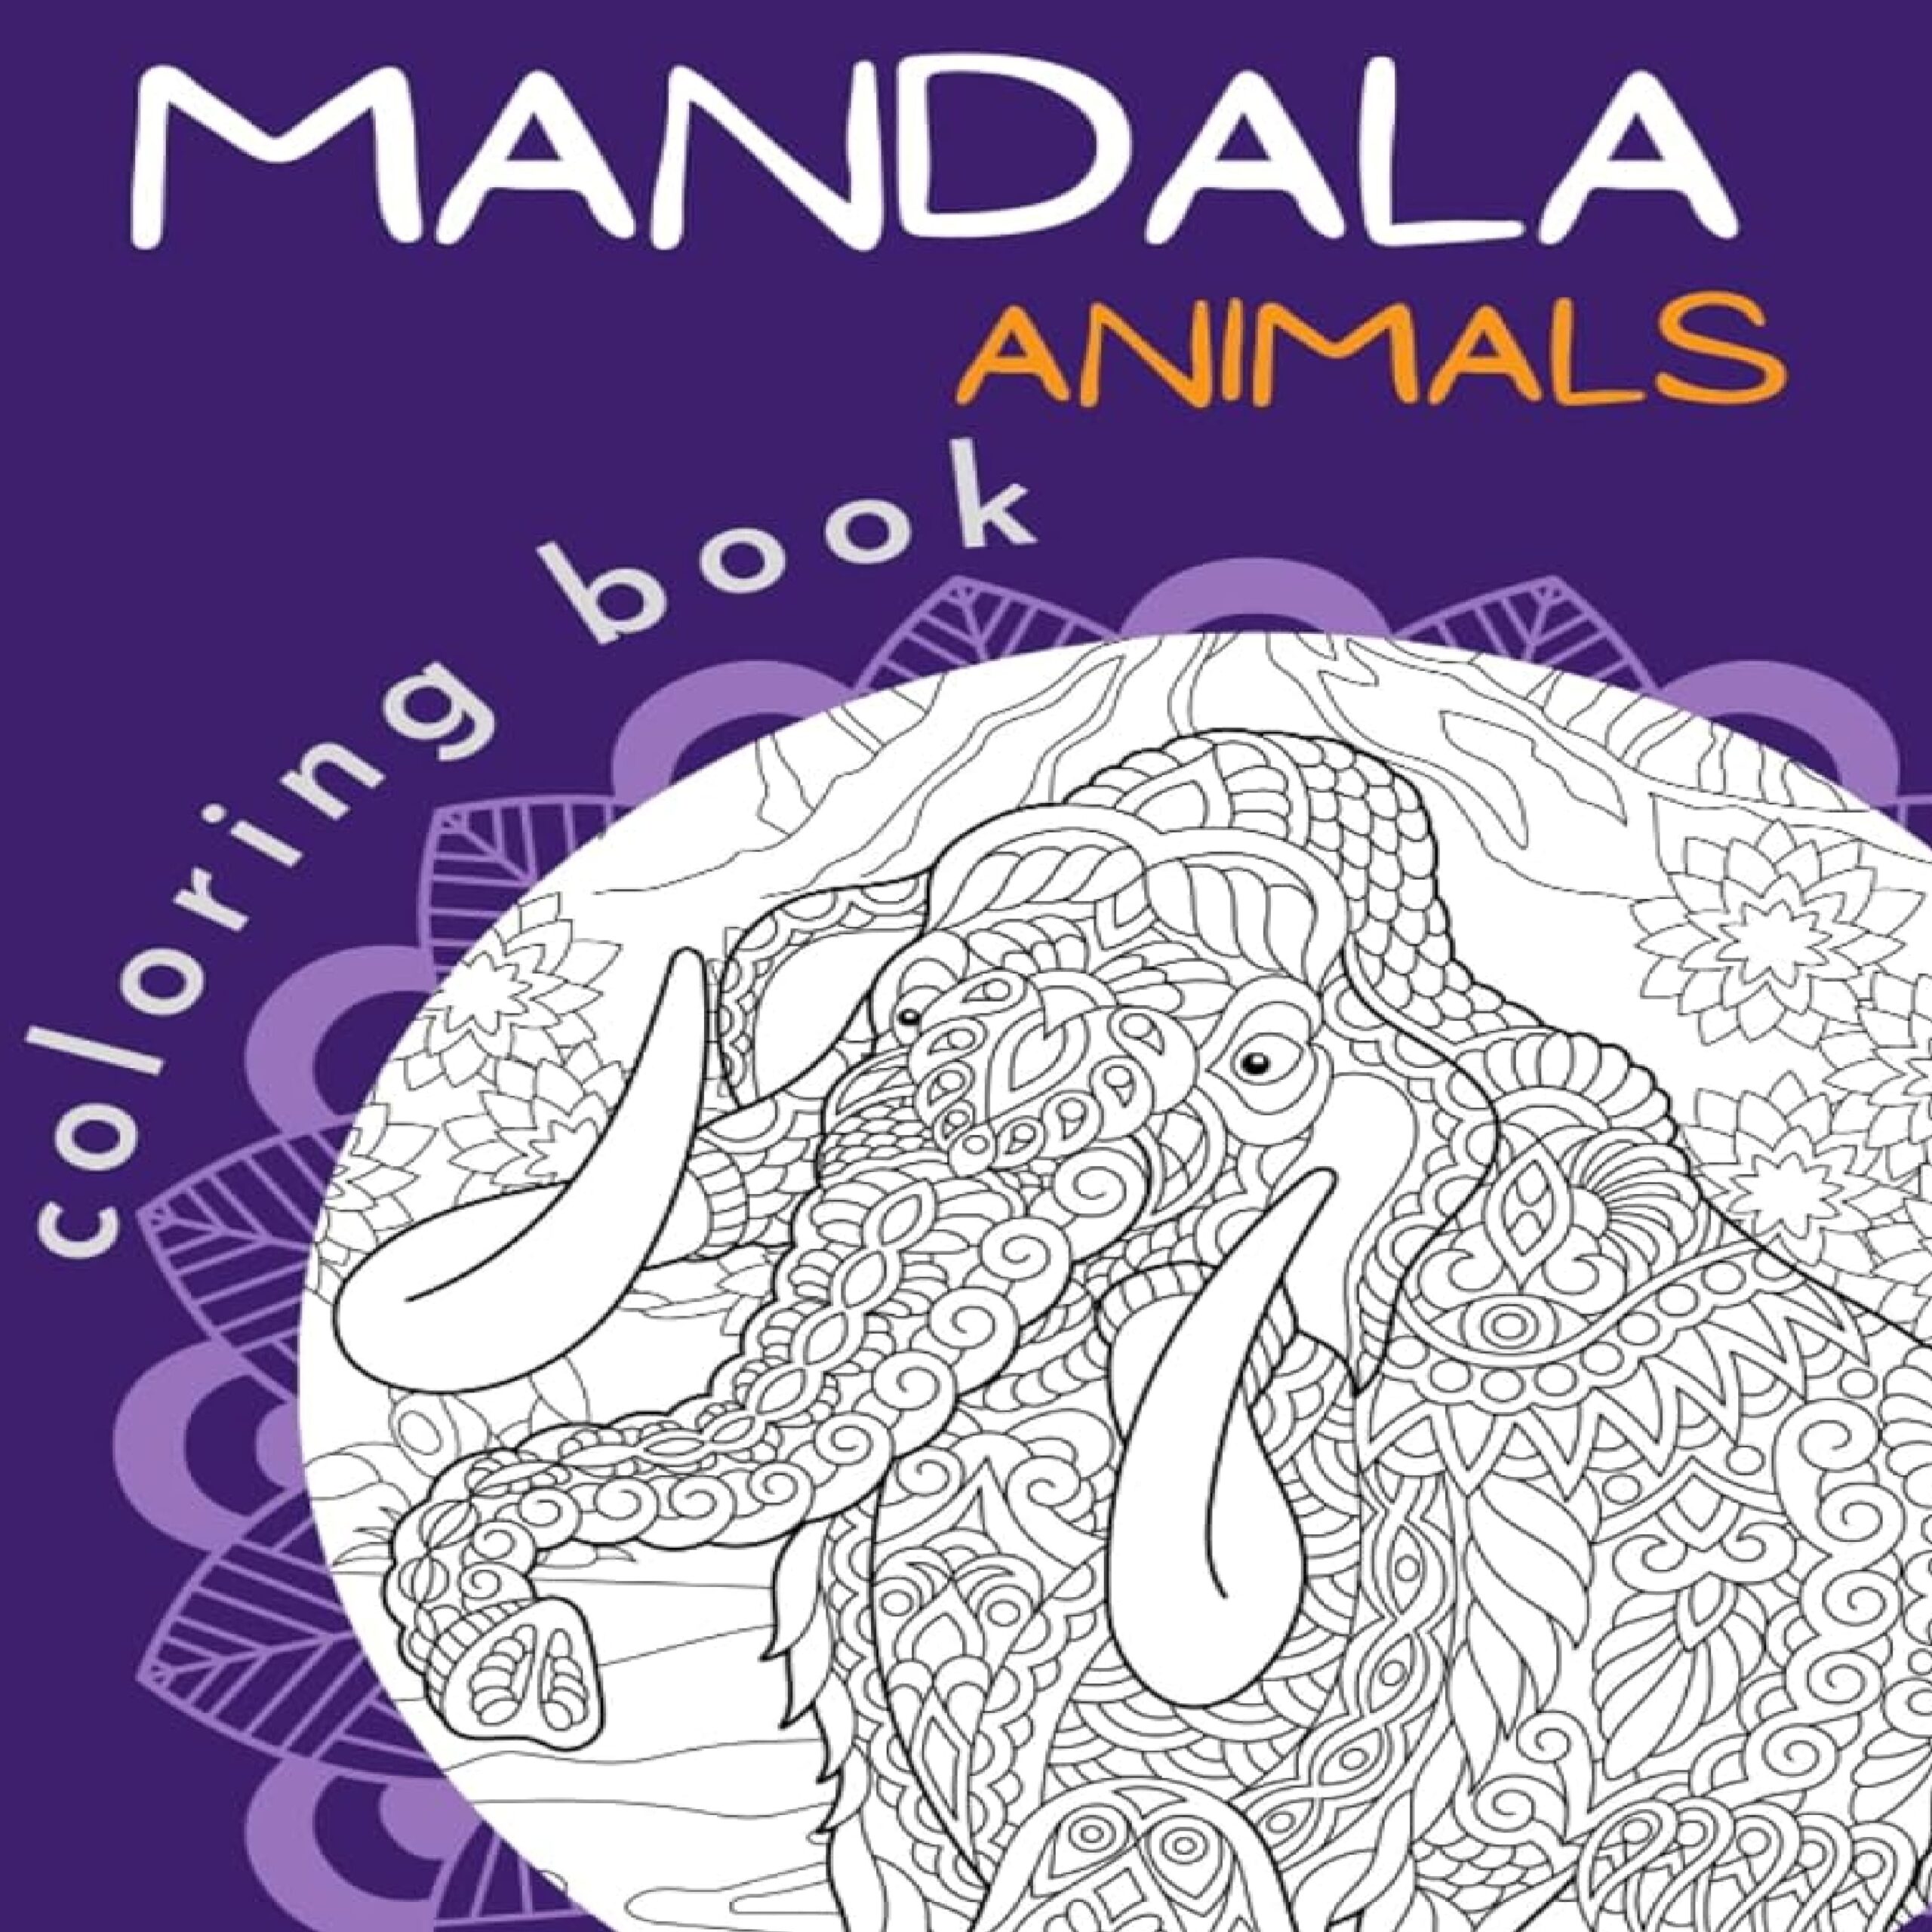 Animals mandala coloring book stress relieving coloring pages for adultsteens made by teachers